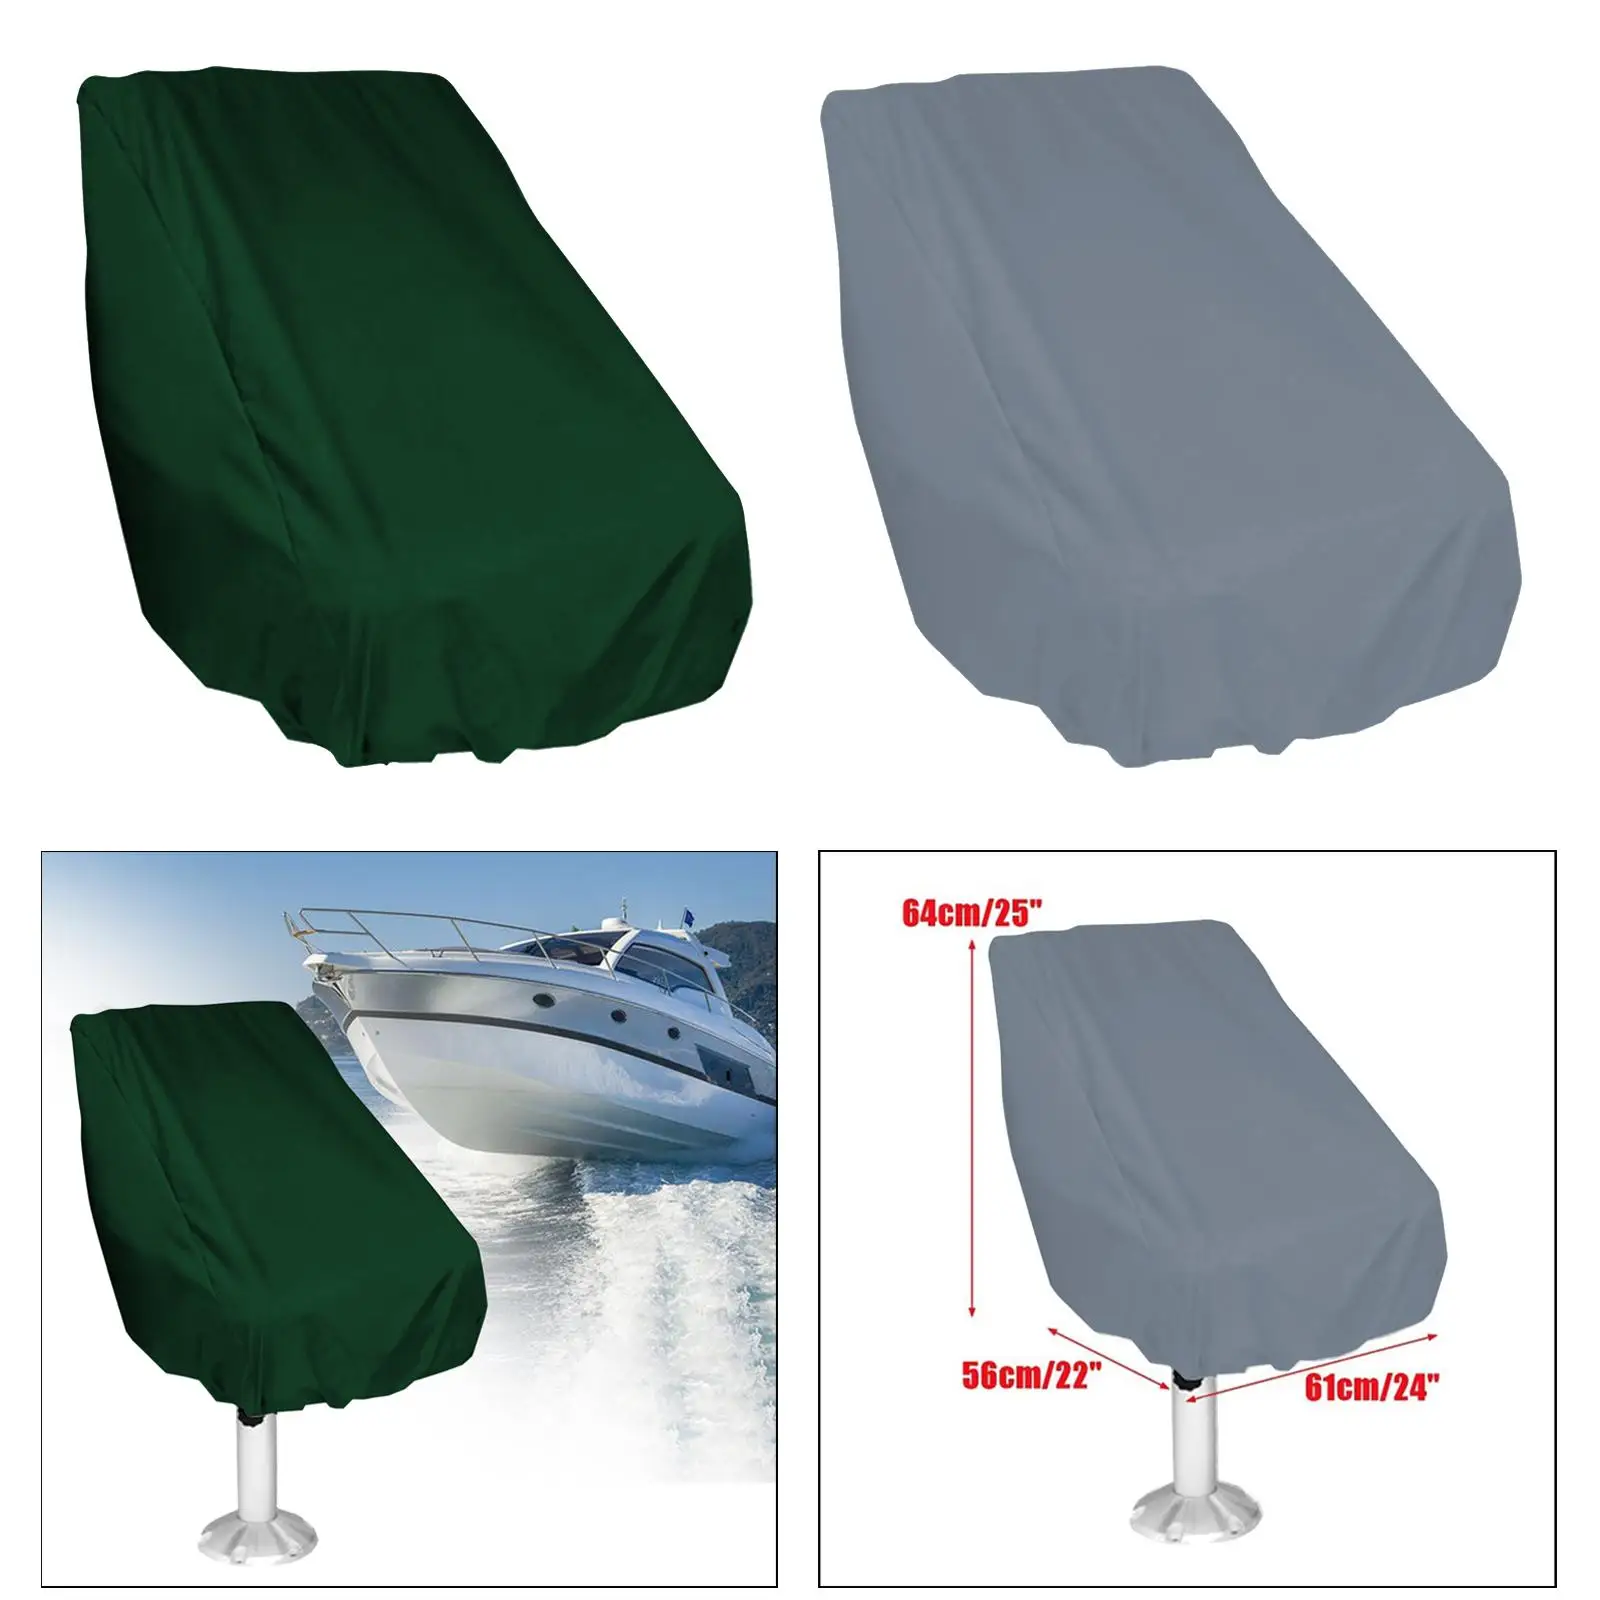 Marine Canvas Boat Seat Covers, Weather Resistant Fabric Protects Captains Chair from The Elements